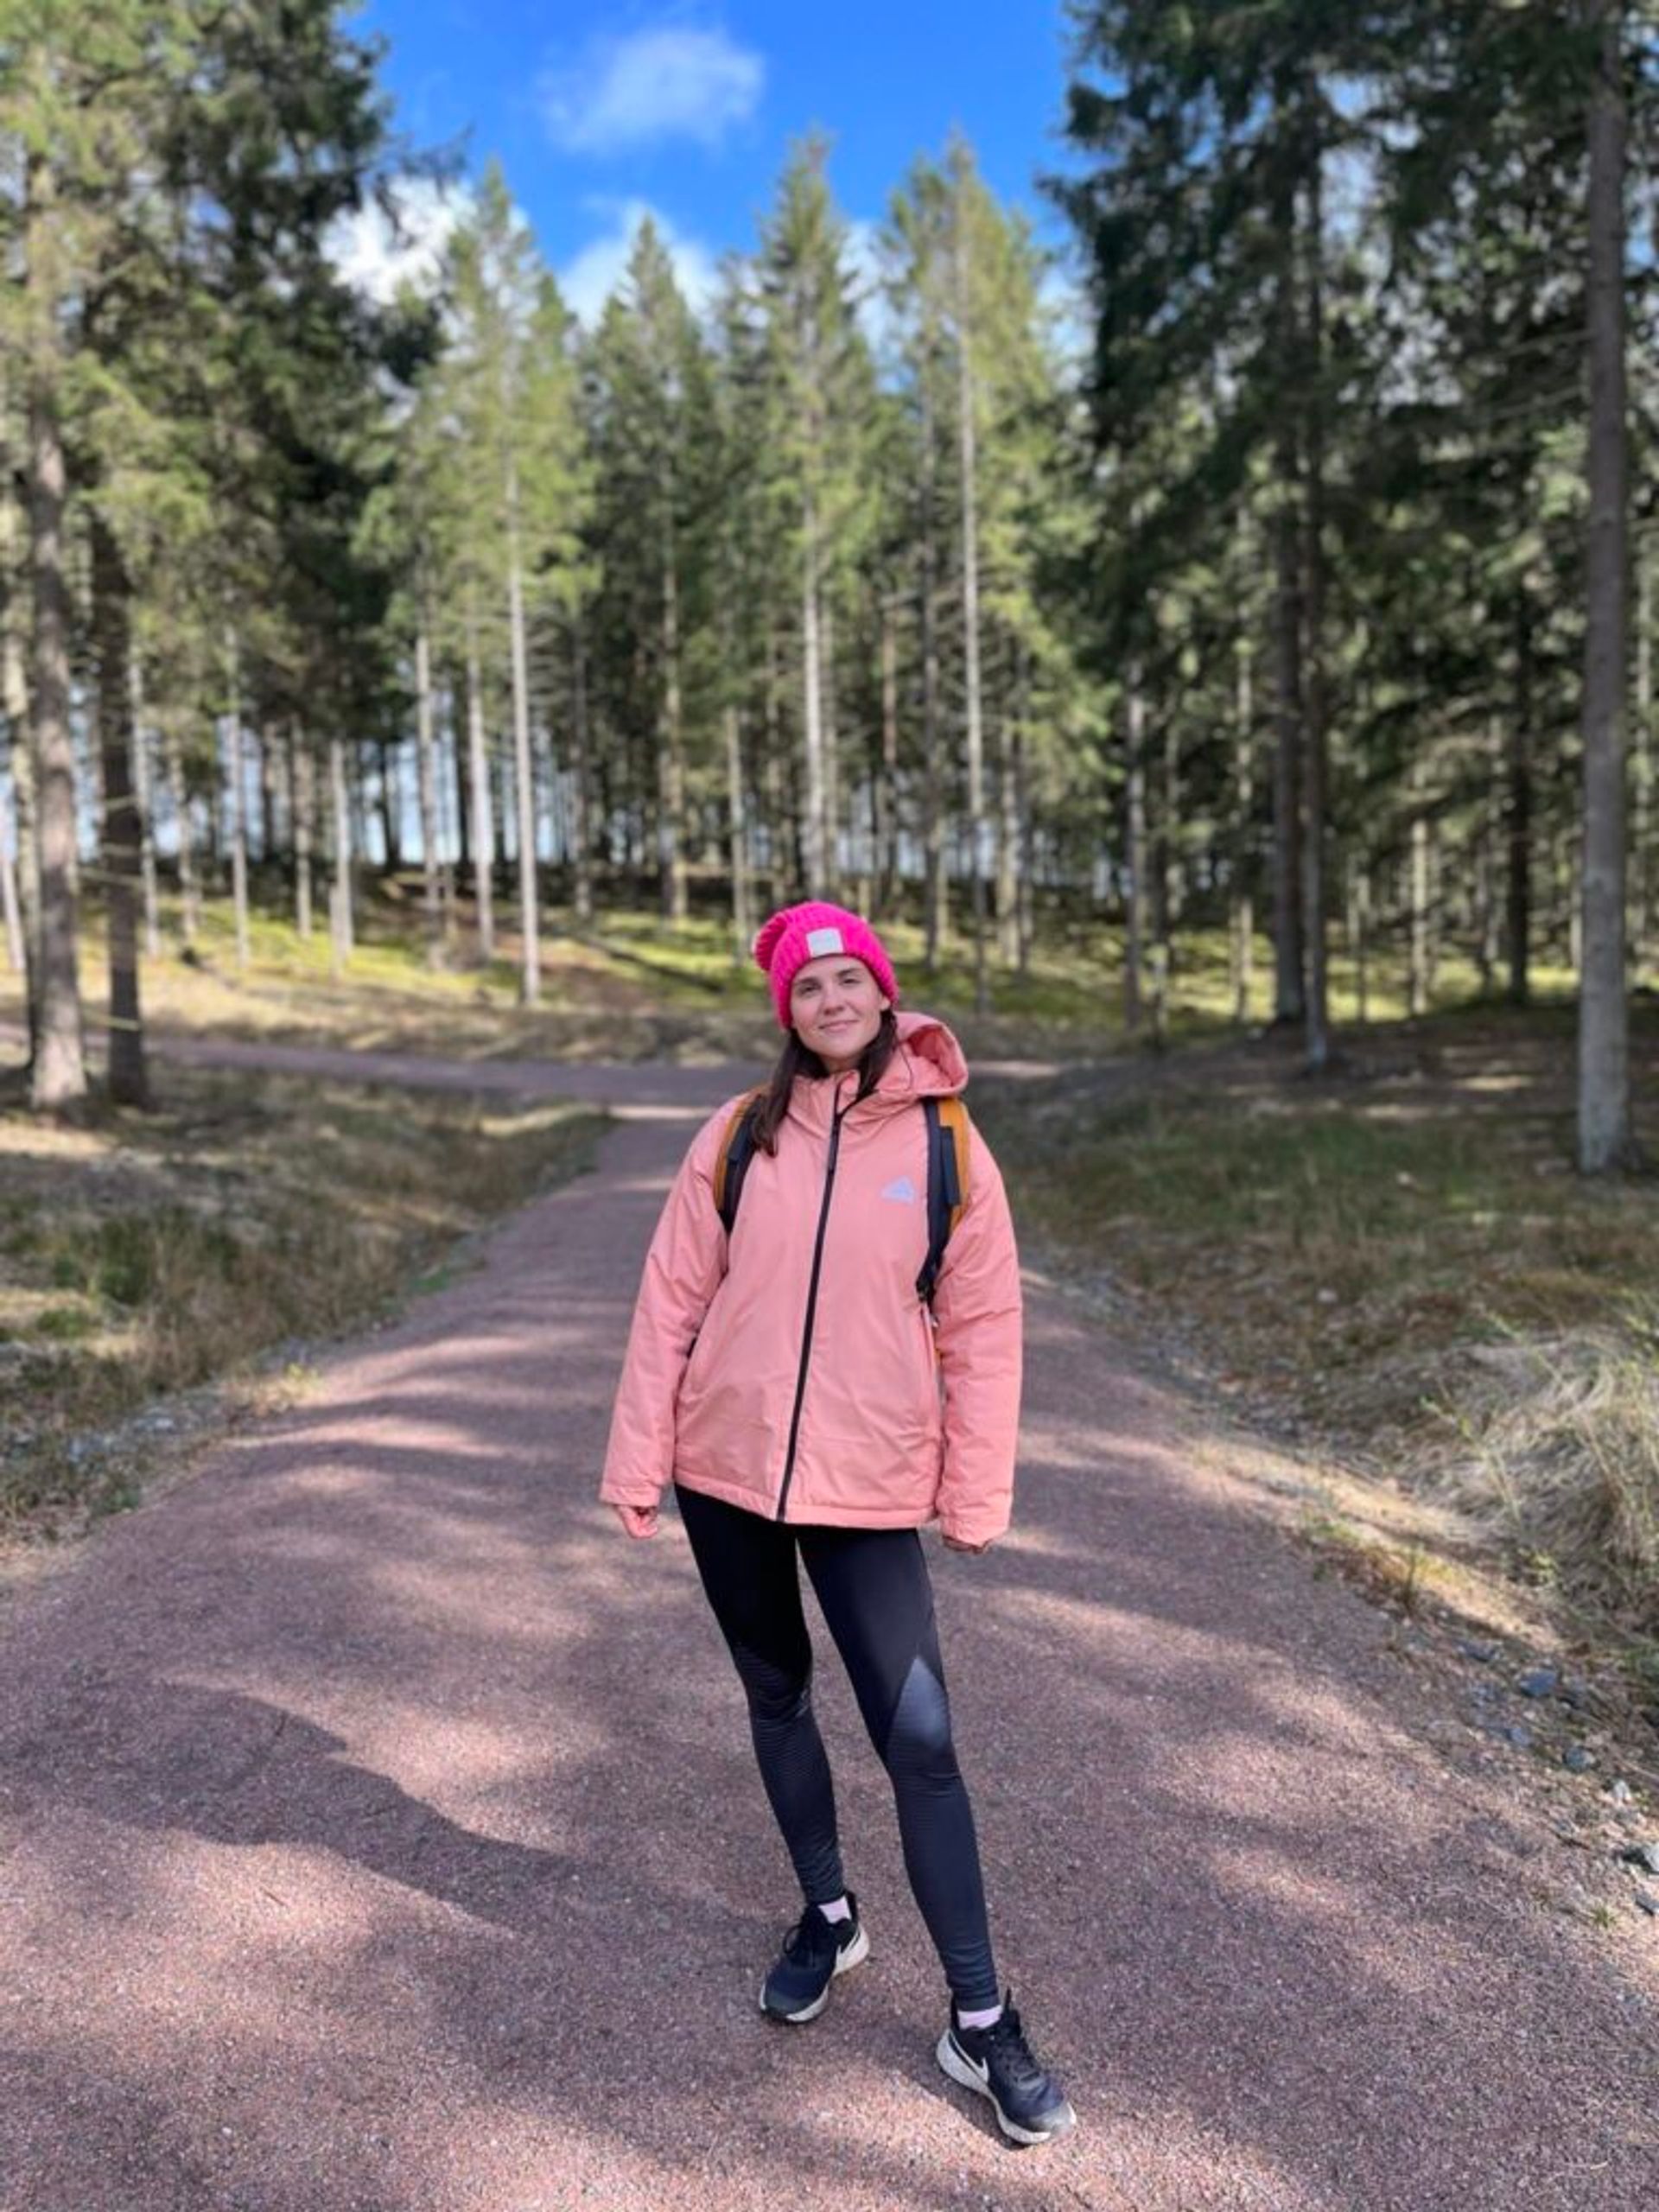 A girl wearing a winter jacket standing in a forest.